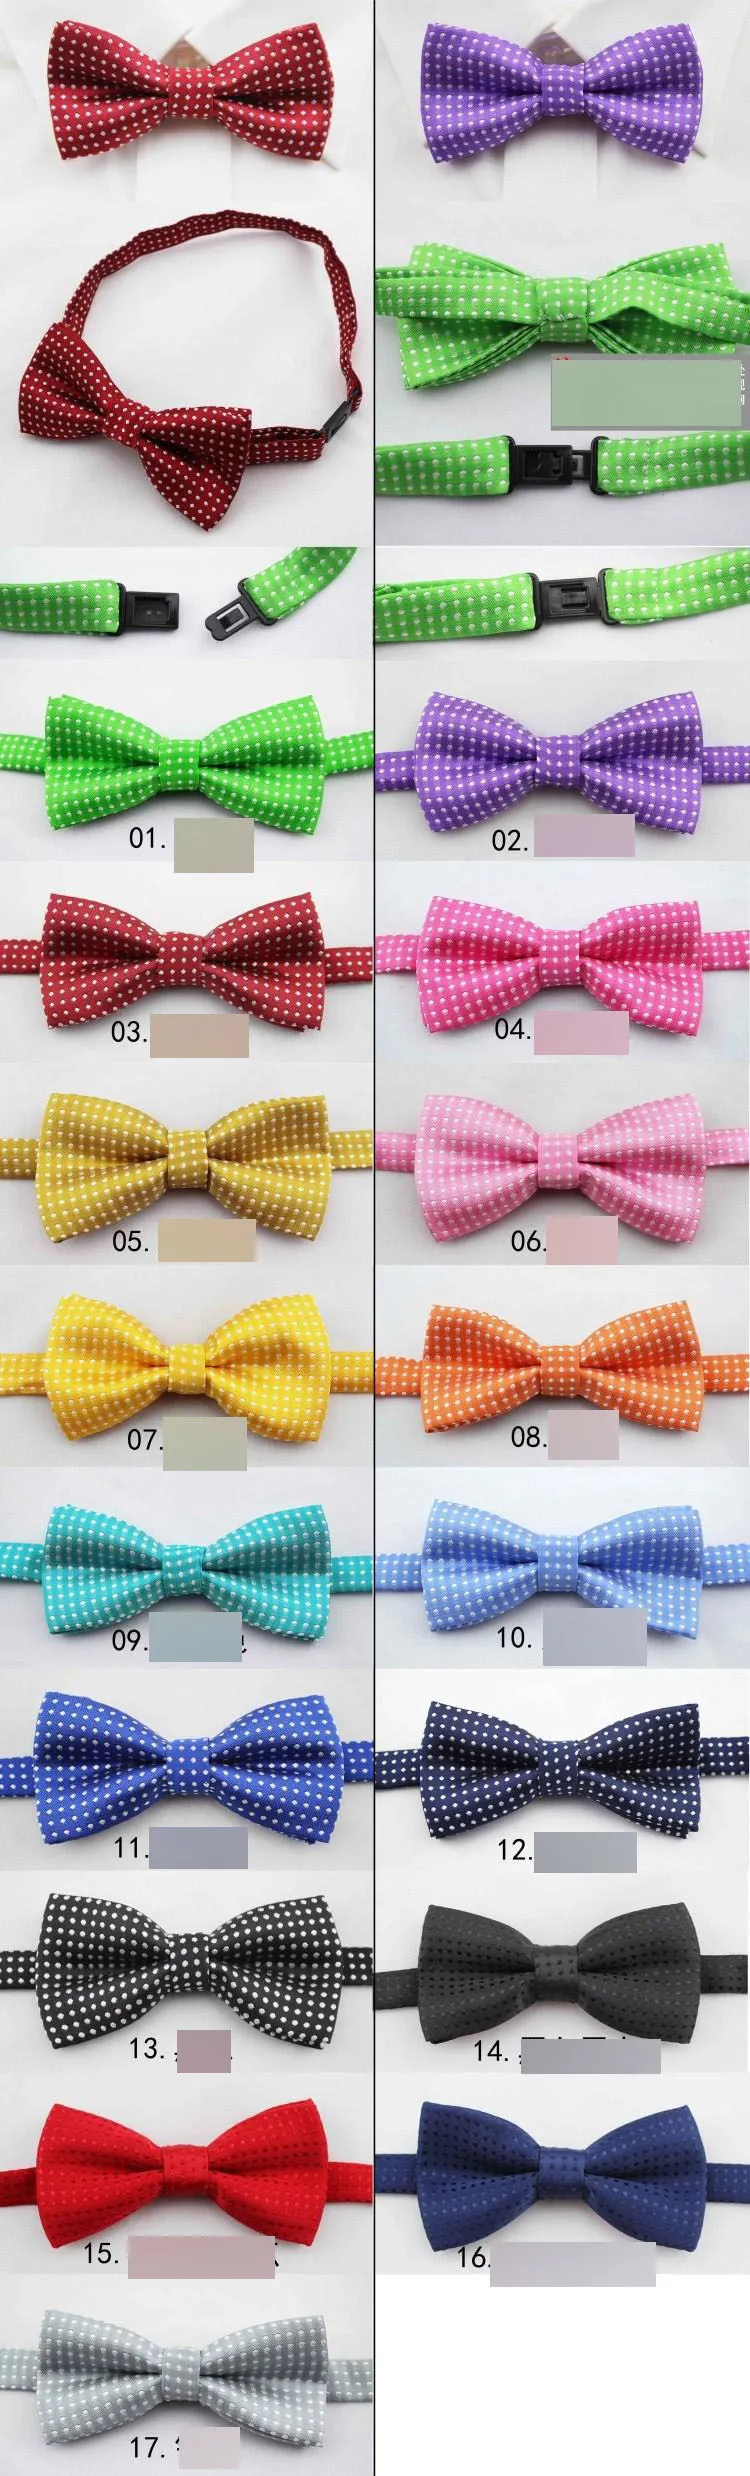 Fashion New Boys Ties Bows Polka Dots Printed Butterfly Children Bow tie England Gentelman Style Dot Kids Party Accessories A7059